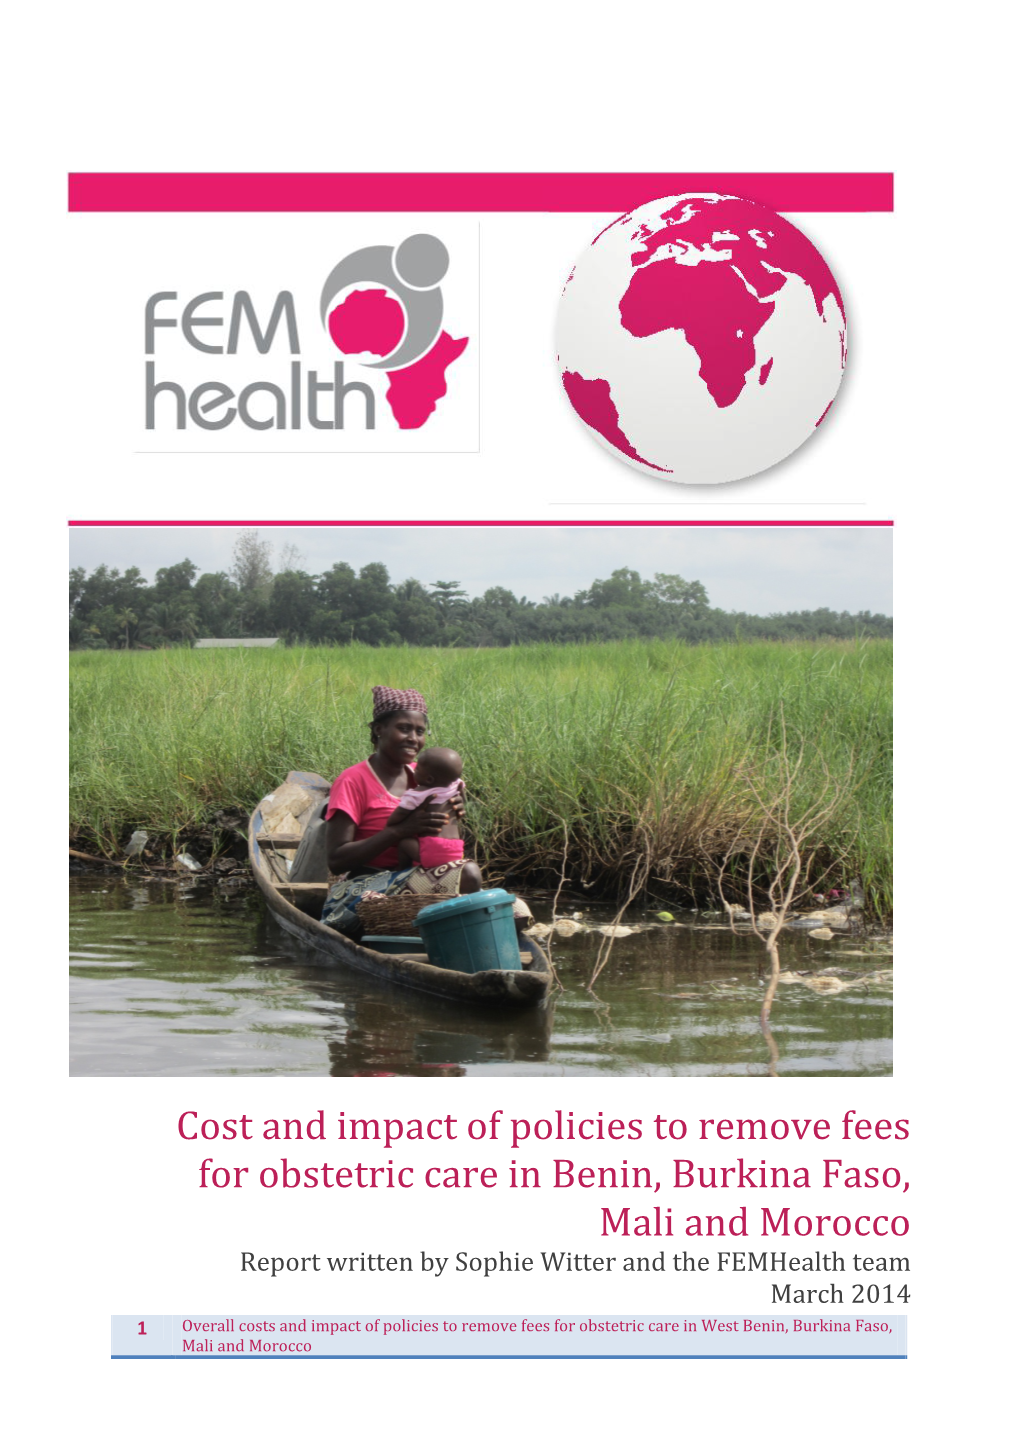 Overall Costs and Impact of Policies to Remove Fees for Obstetric Care in West Benin, Burkina Faso, Mali and Morocco